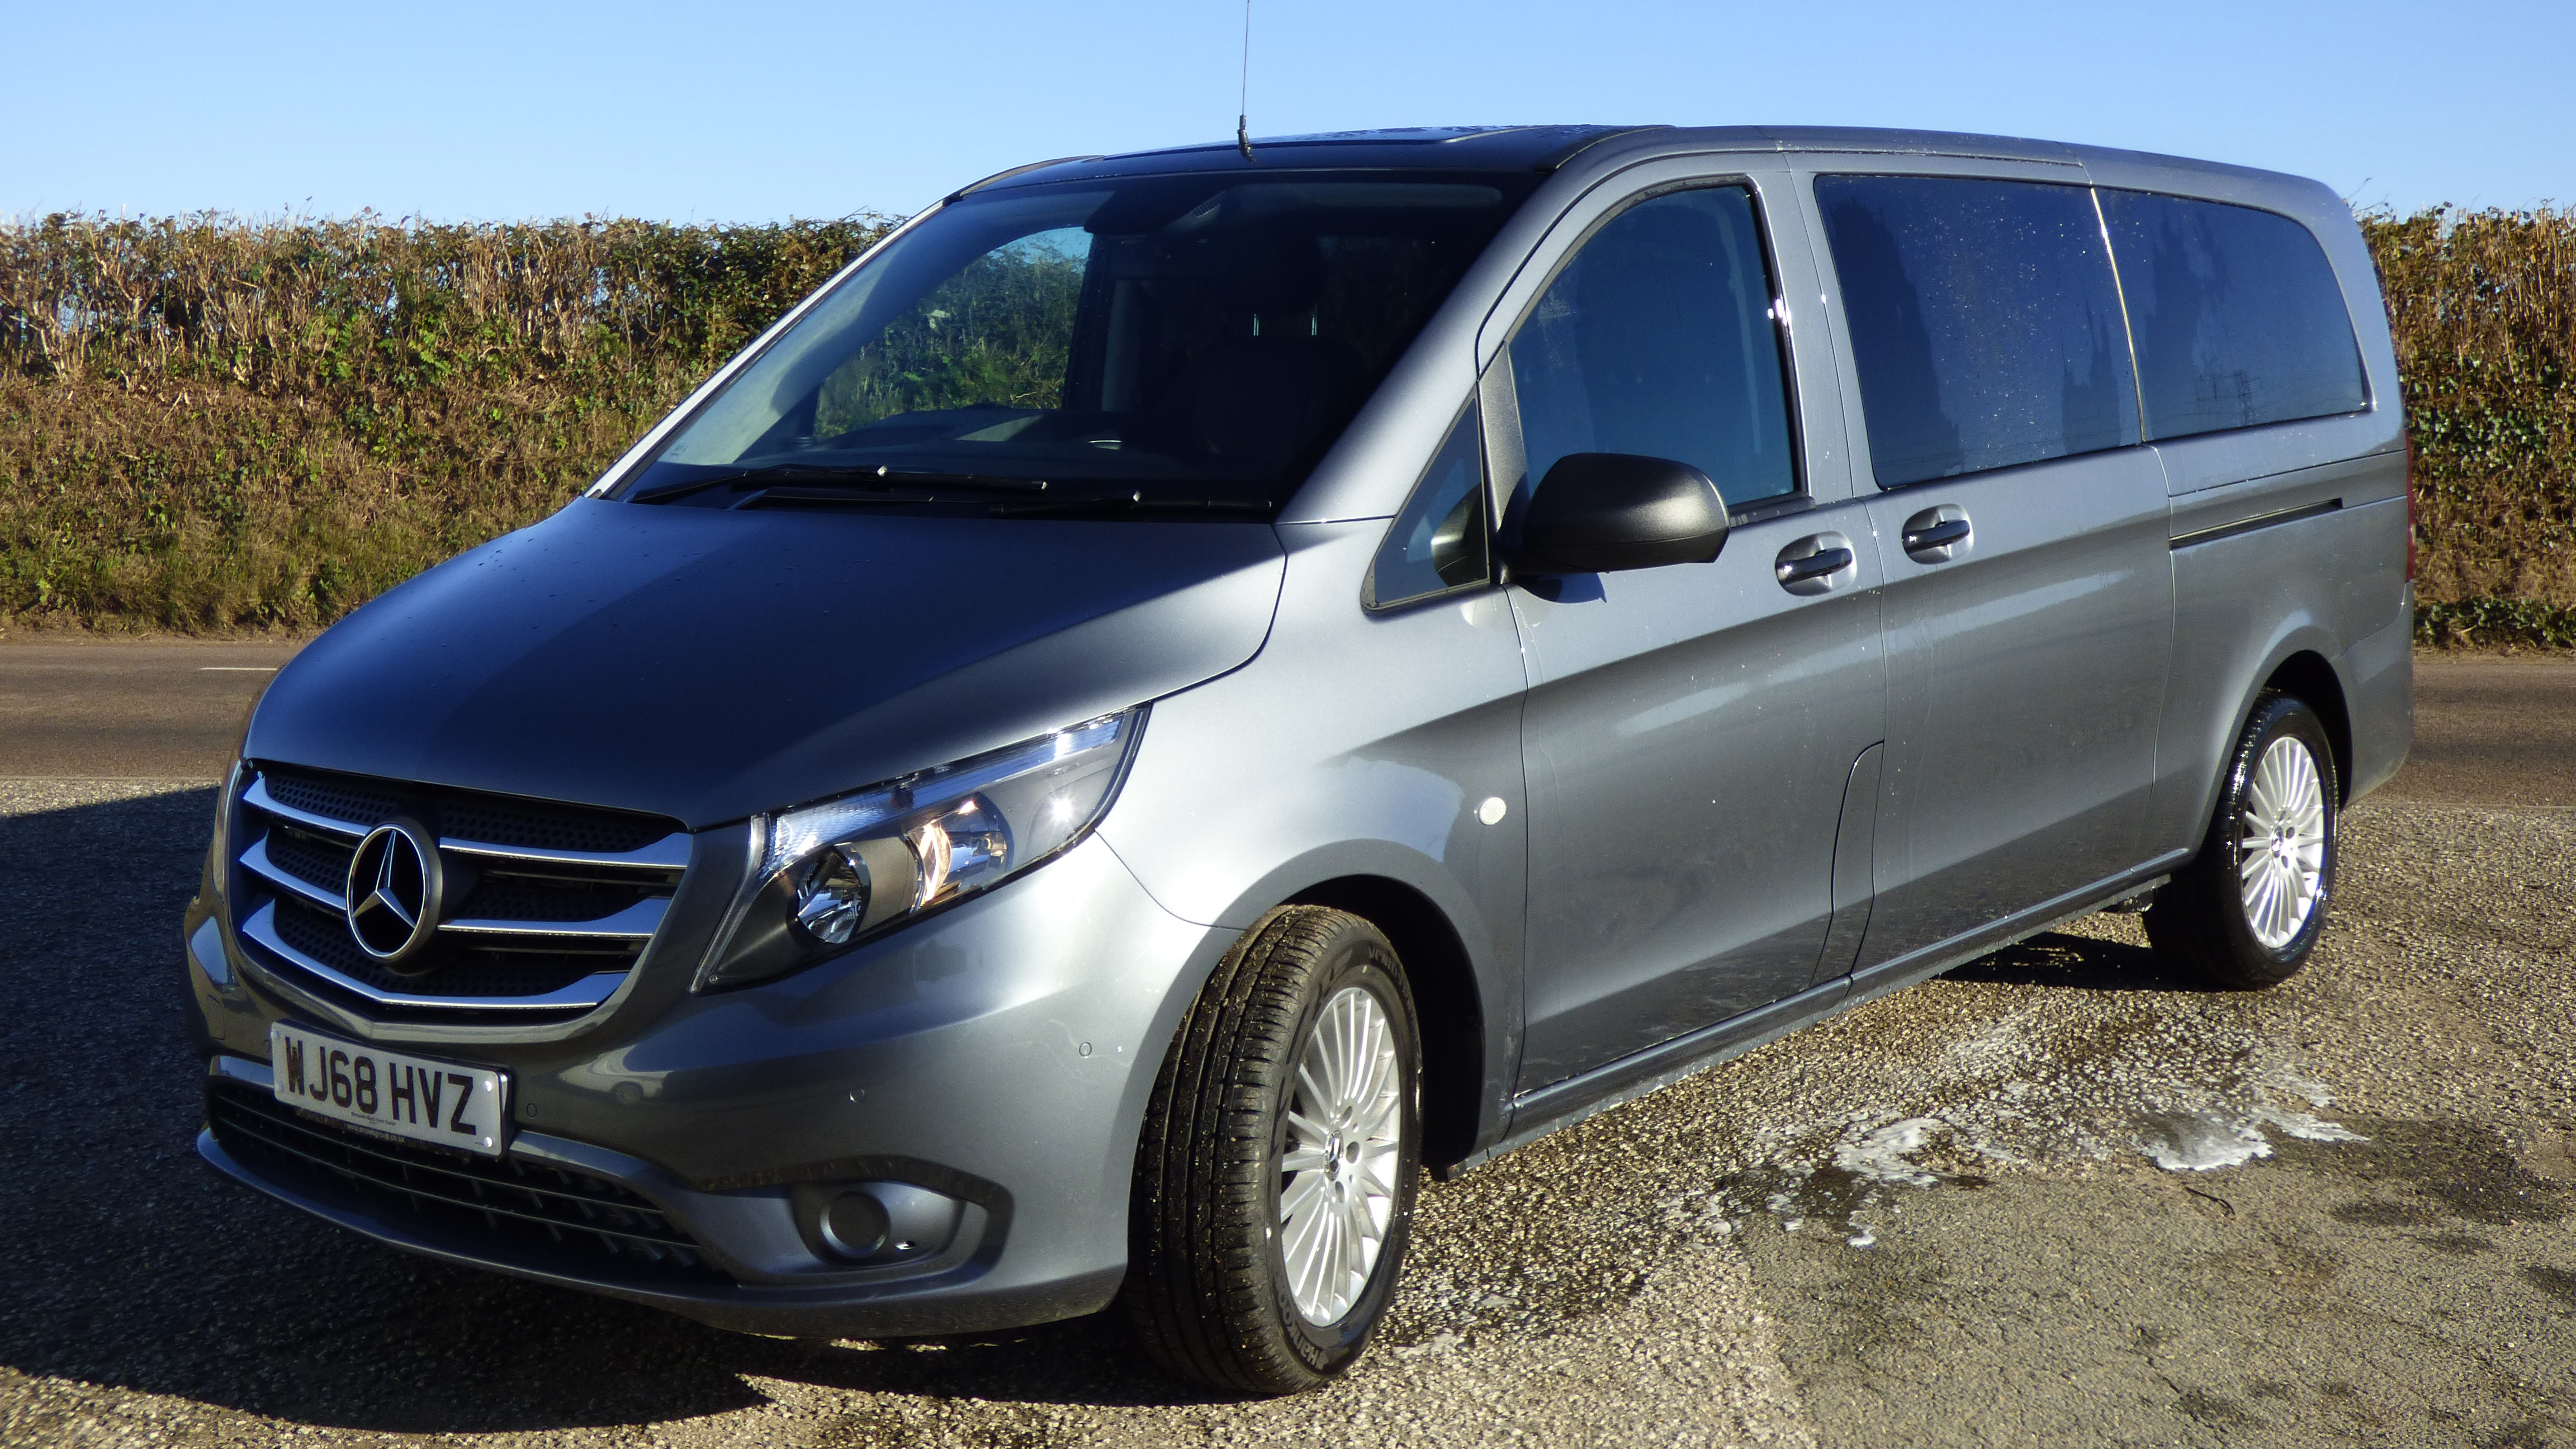 Mercedes Vito wedding car for hire in Newquay, Cornwall